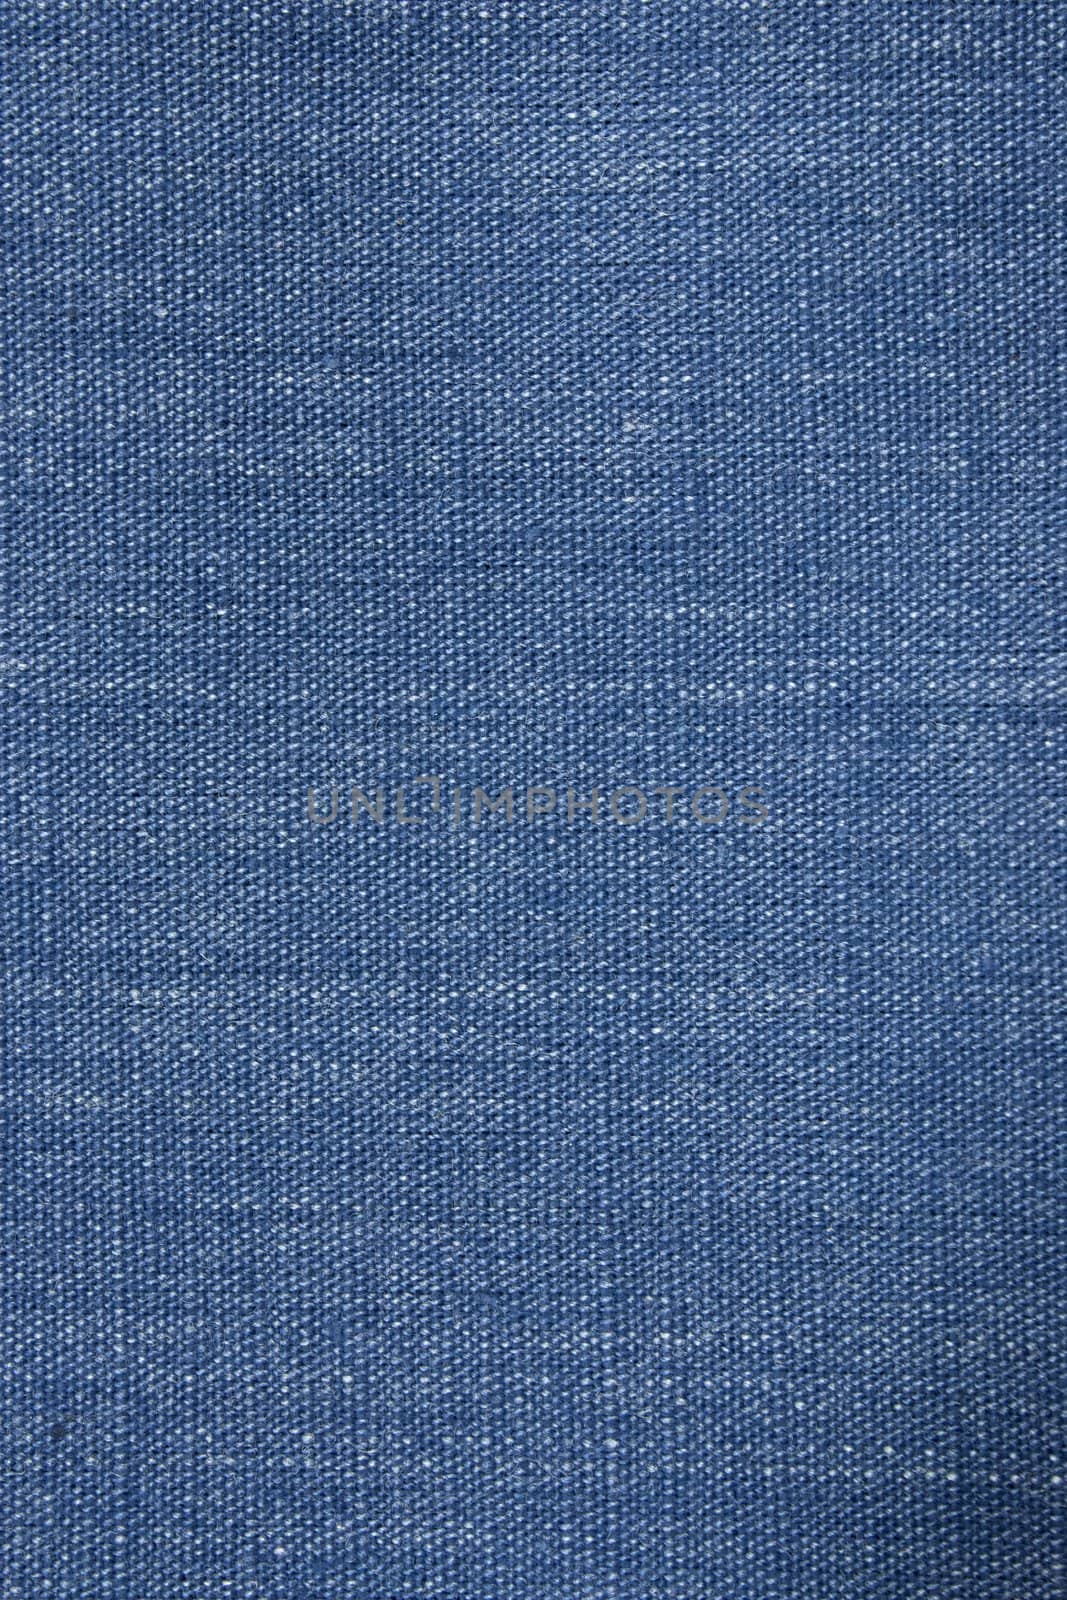 Blue denim background closeup with visible weave